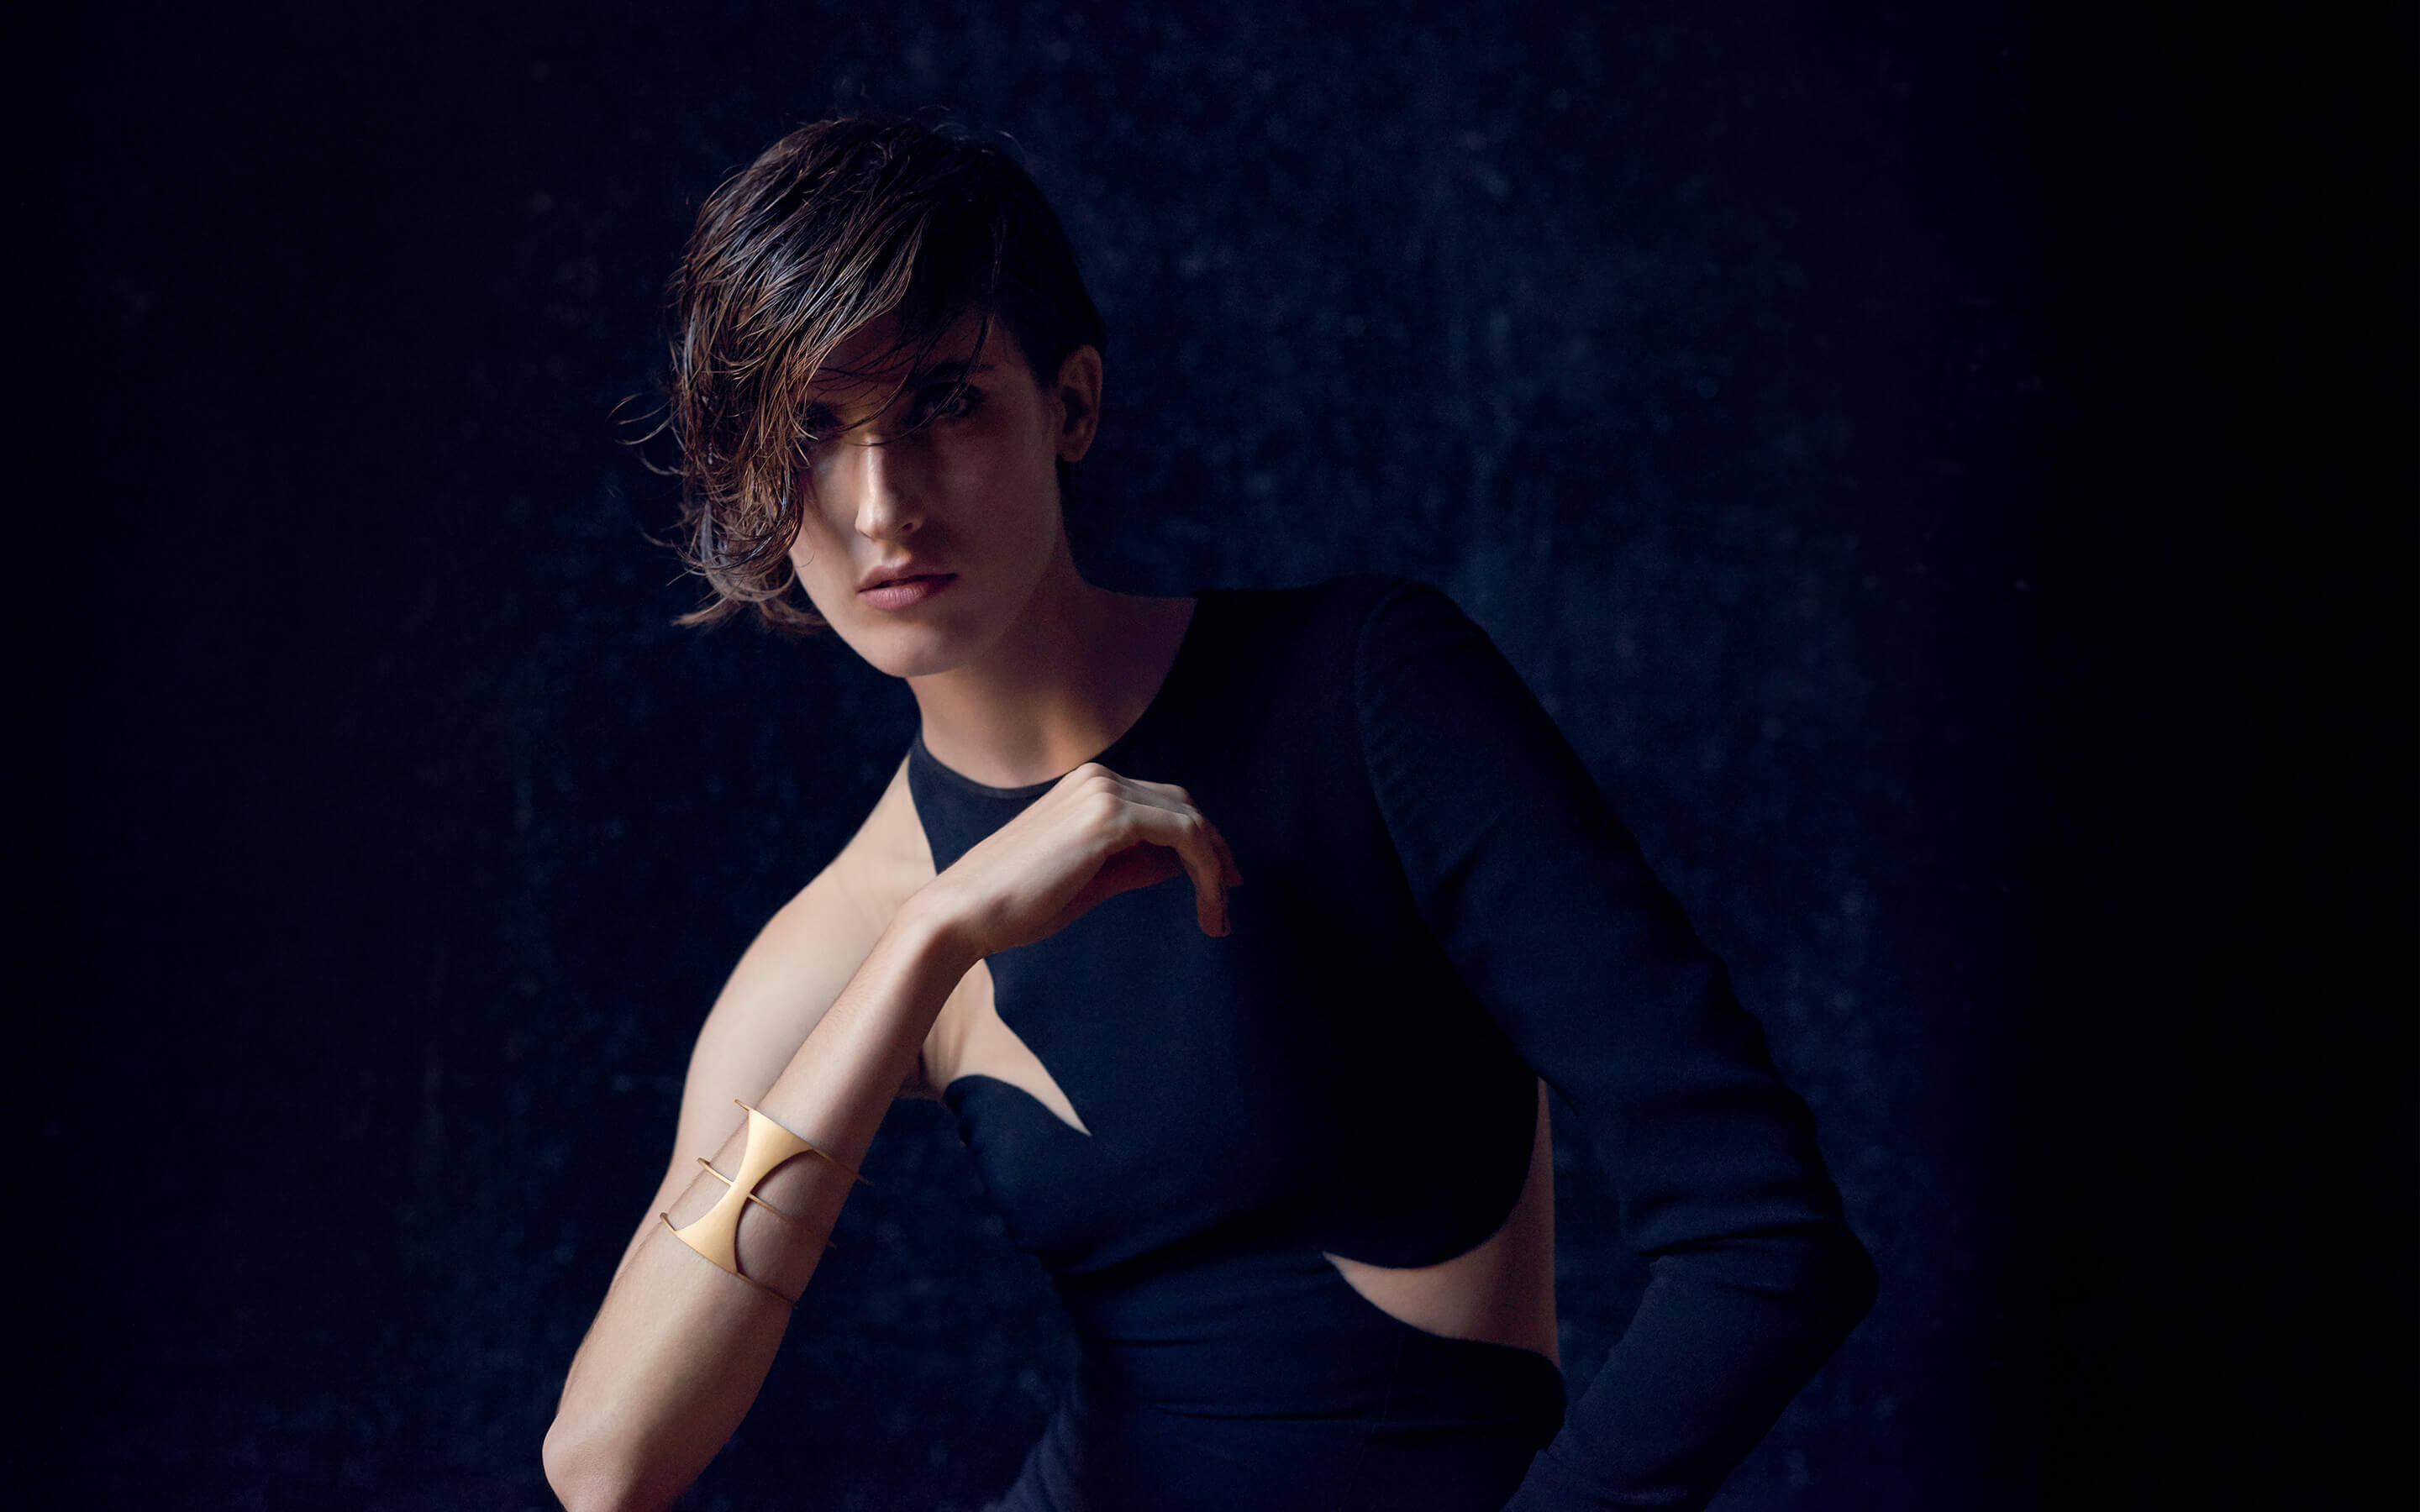 Woman model wearing Auvere 22 and 24 karat gold jewelry from the Cosmic Gold campaign